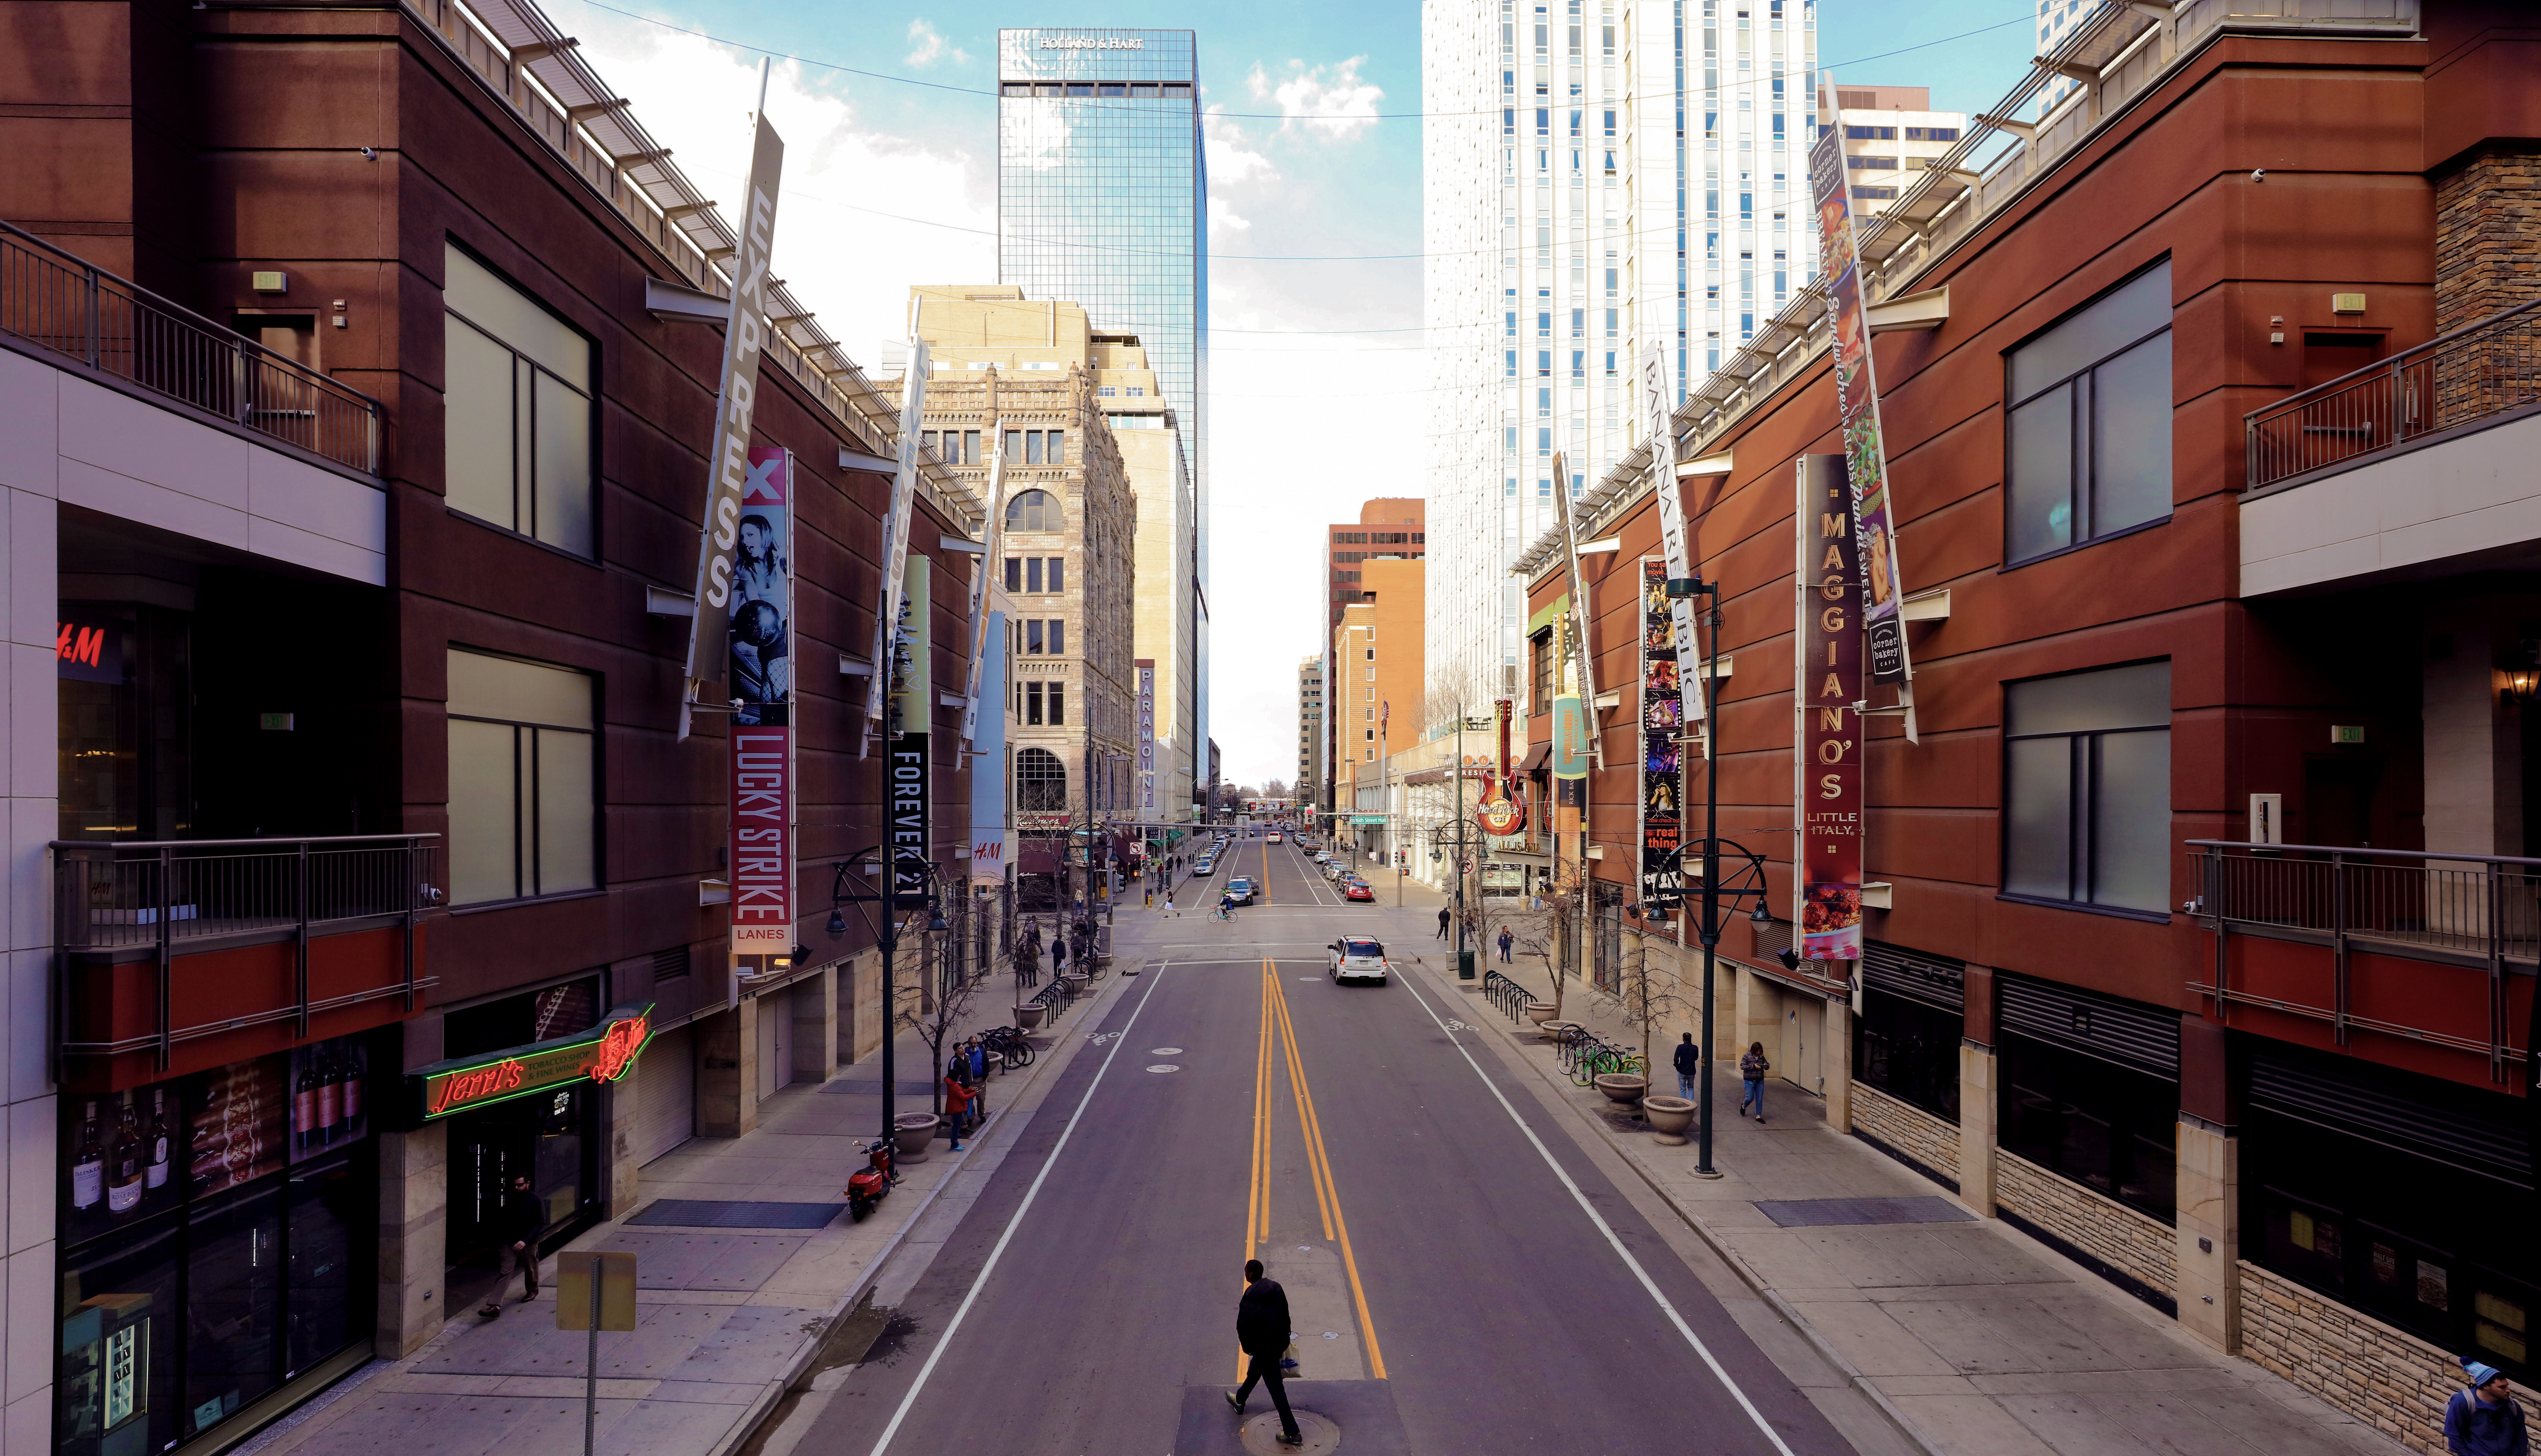 A picture of downtown Denver with buildings lining both the left and right sides of the street